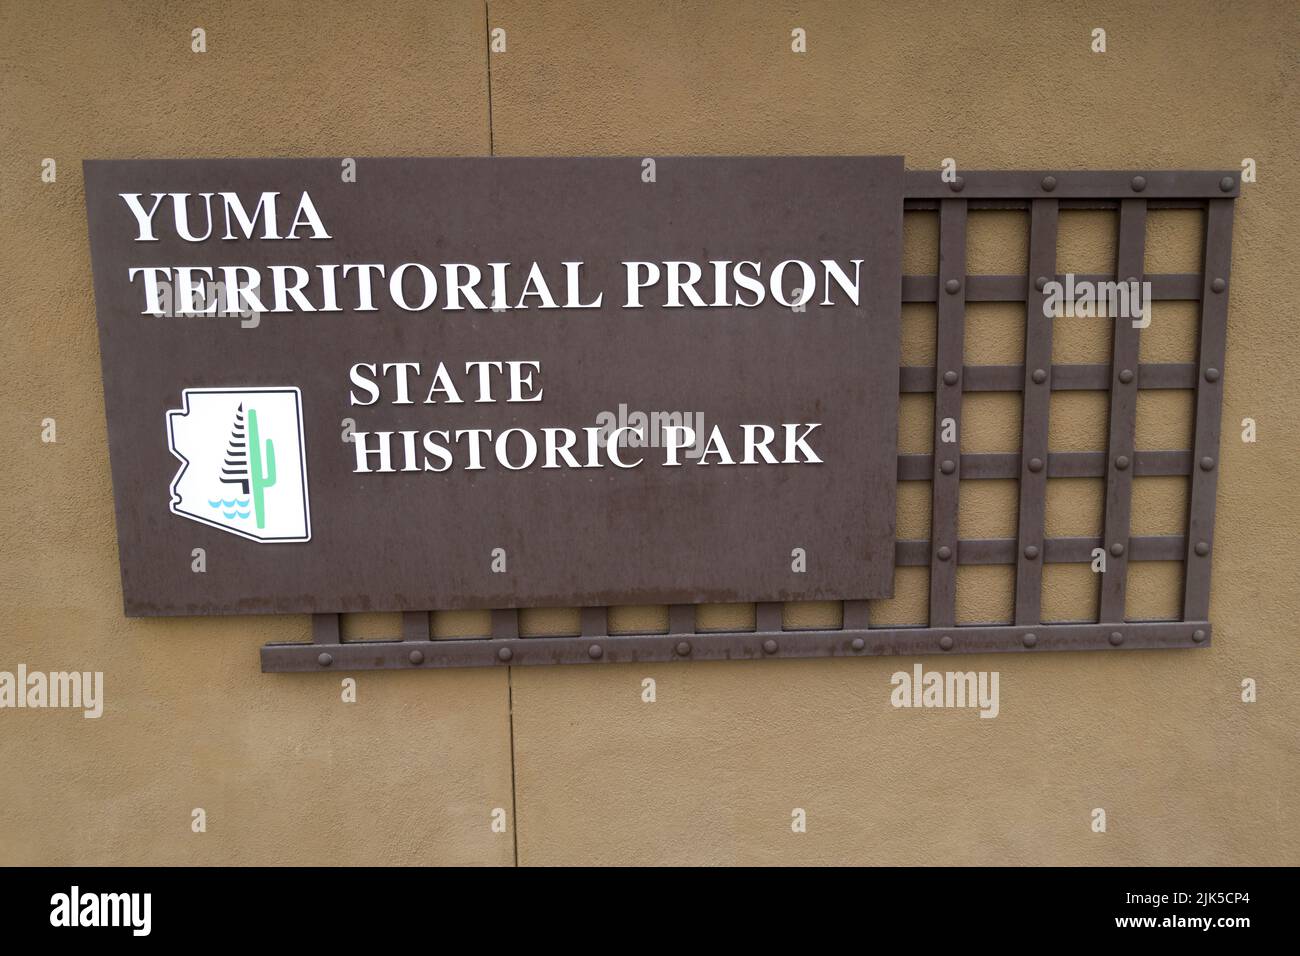 Information Table with Text against Brown Wall and Iron Bars at Entrance Gate to Famous Yuma Territorial Prison Arizona USA State Historic Park Stock Photo